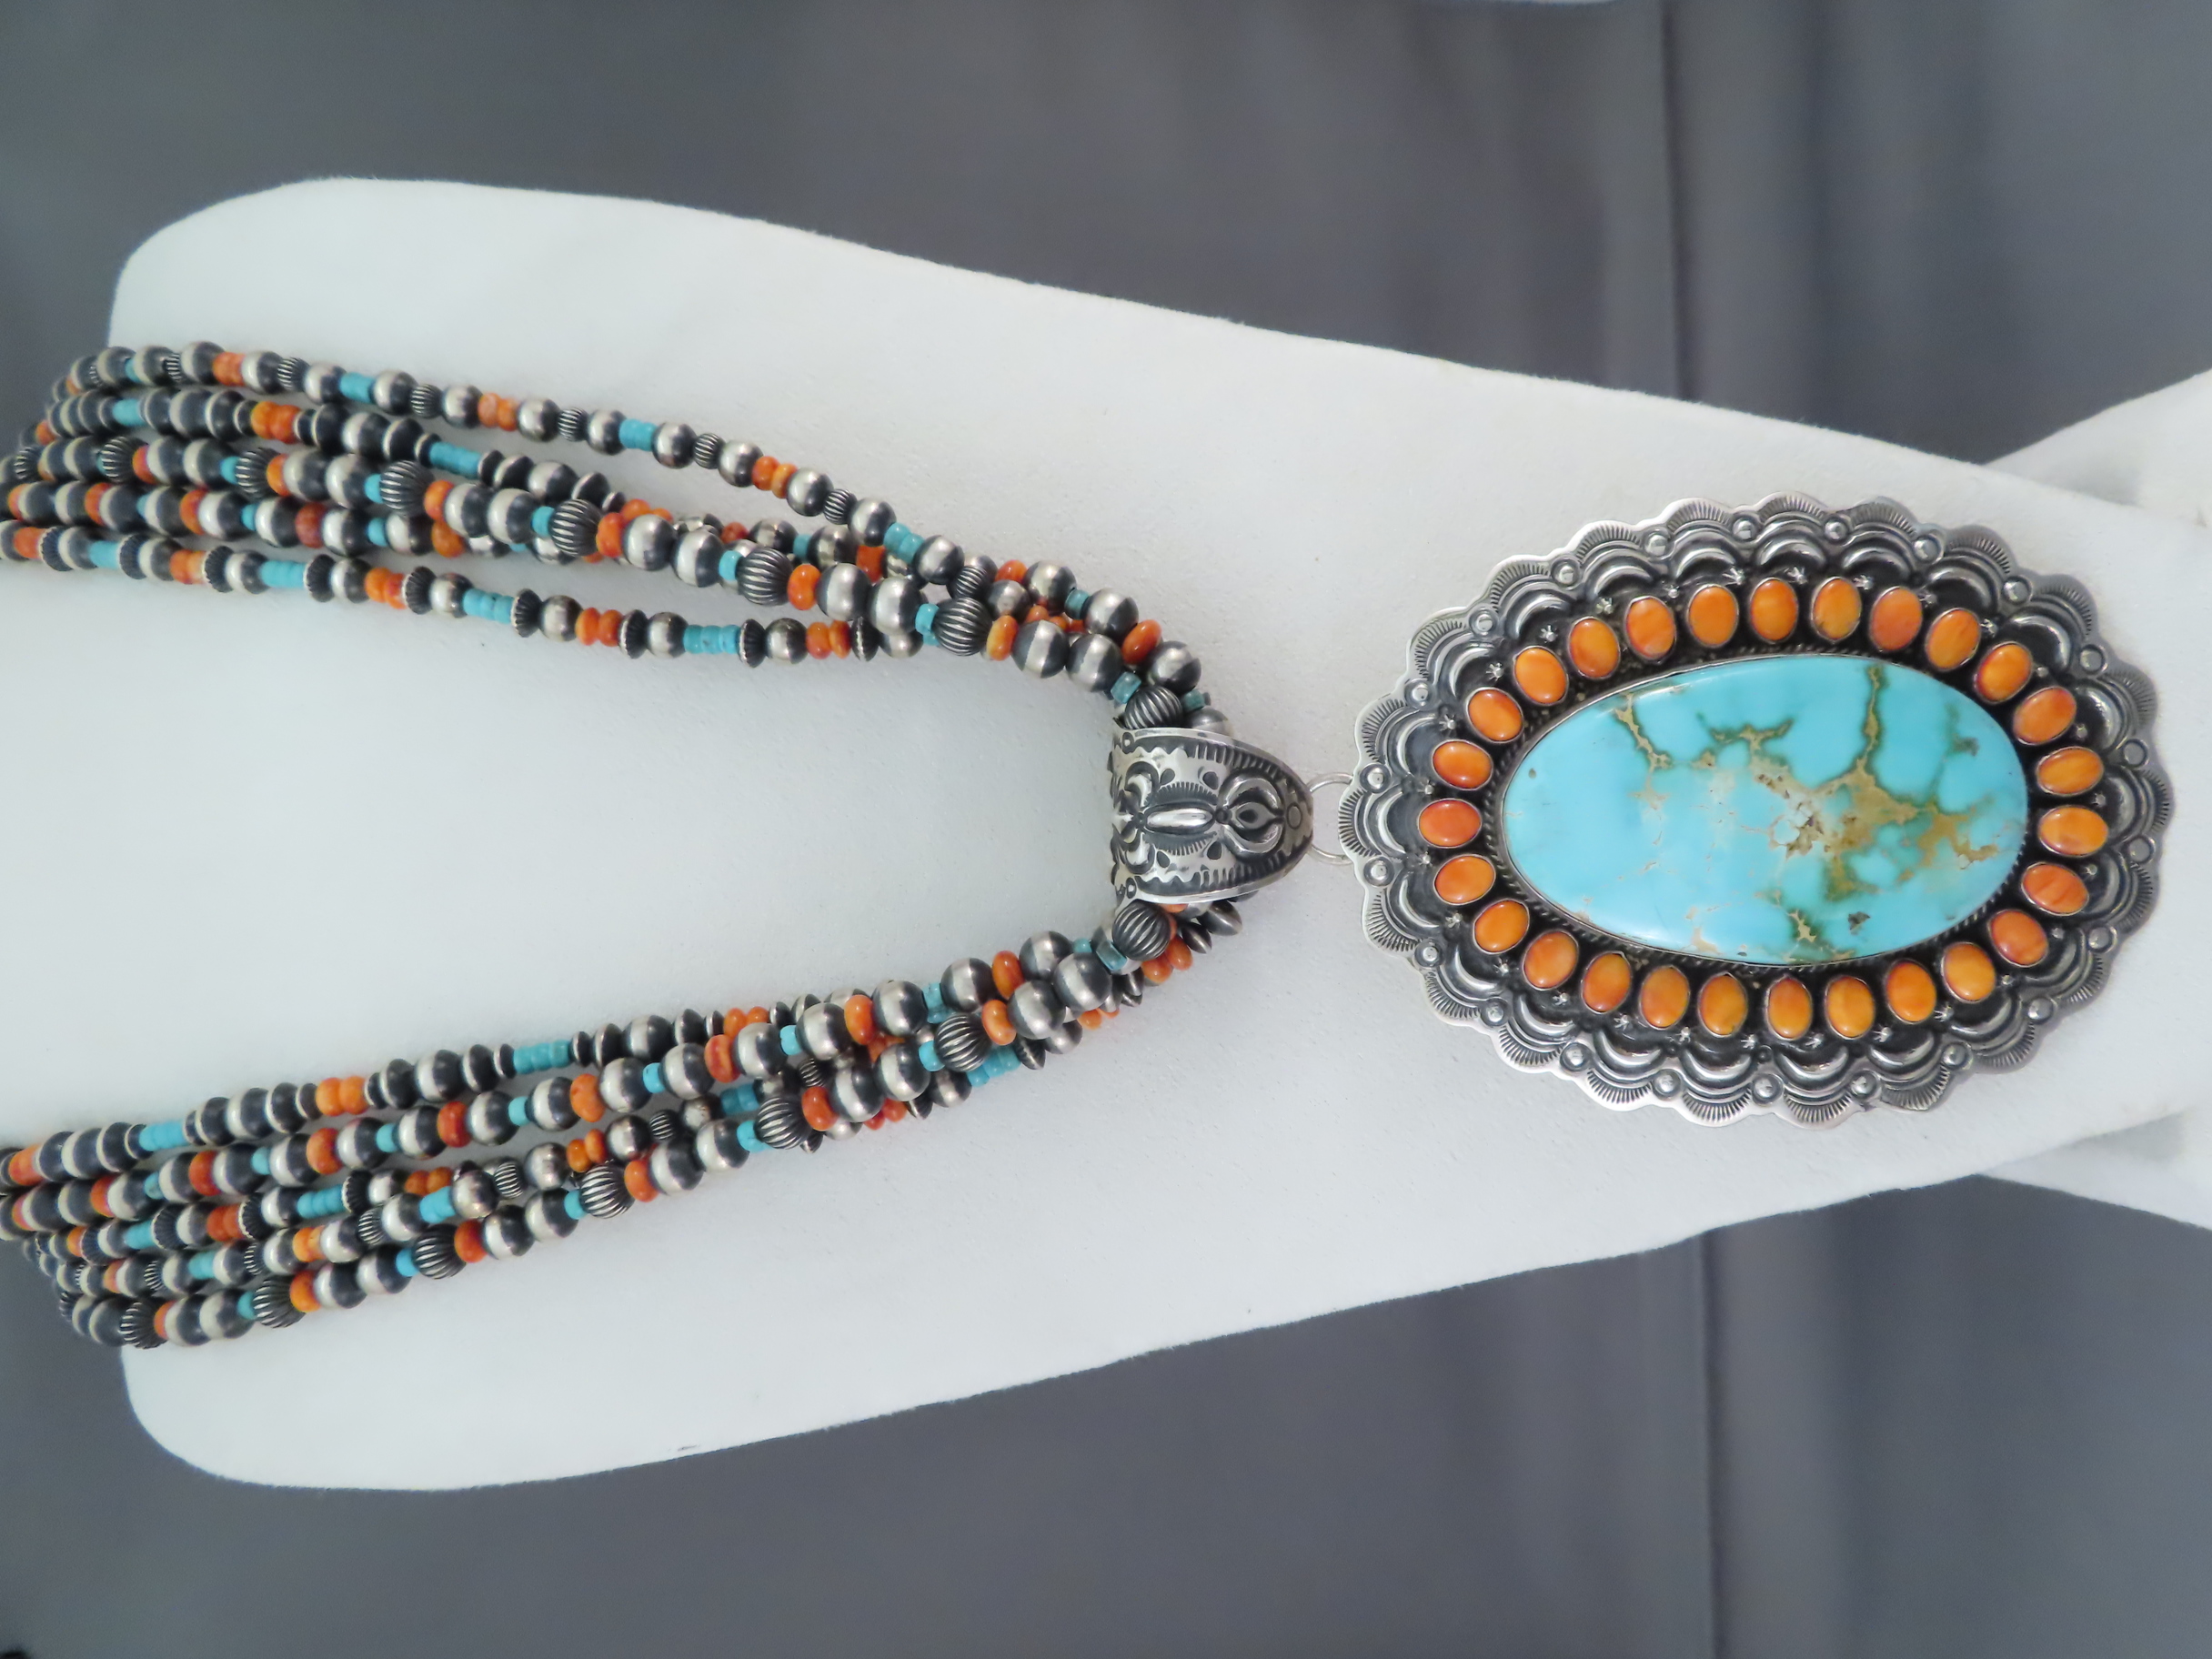 HUGE Turquoise Necklace - Very Large Royston Turquoise Necklace with Spiny Oyster Shell by Native American jewelry artist, Darryl Becenti FOR SALE $5,400-